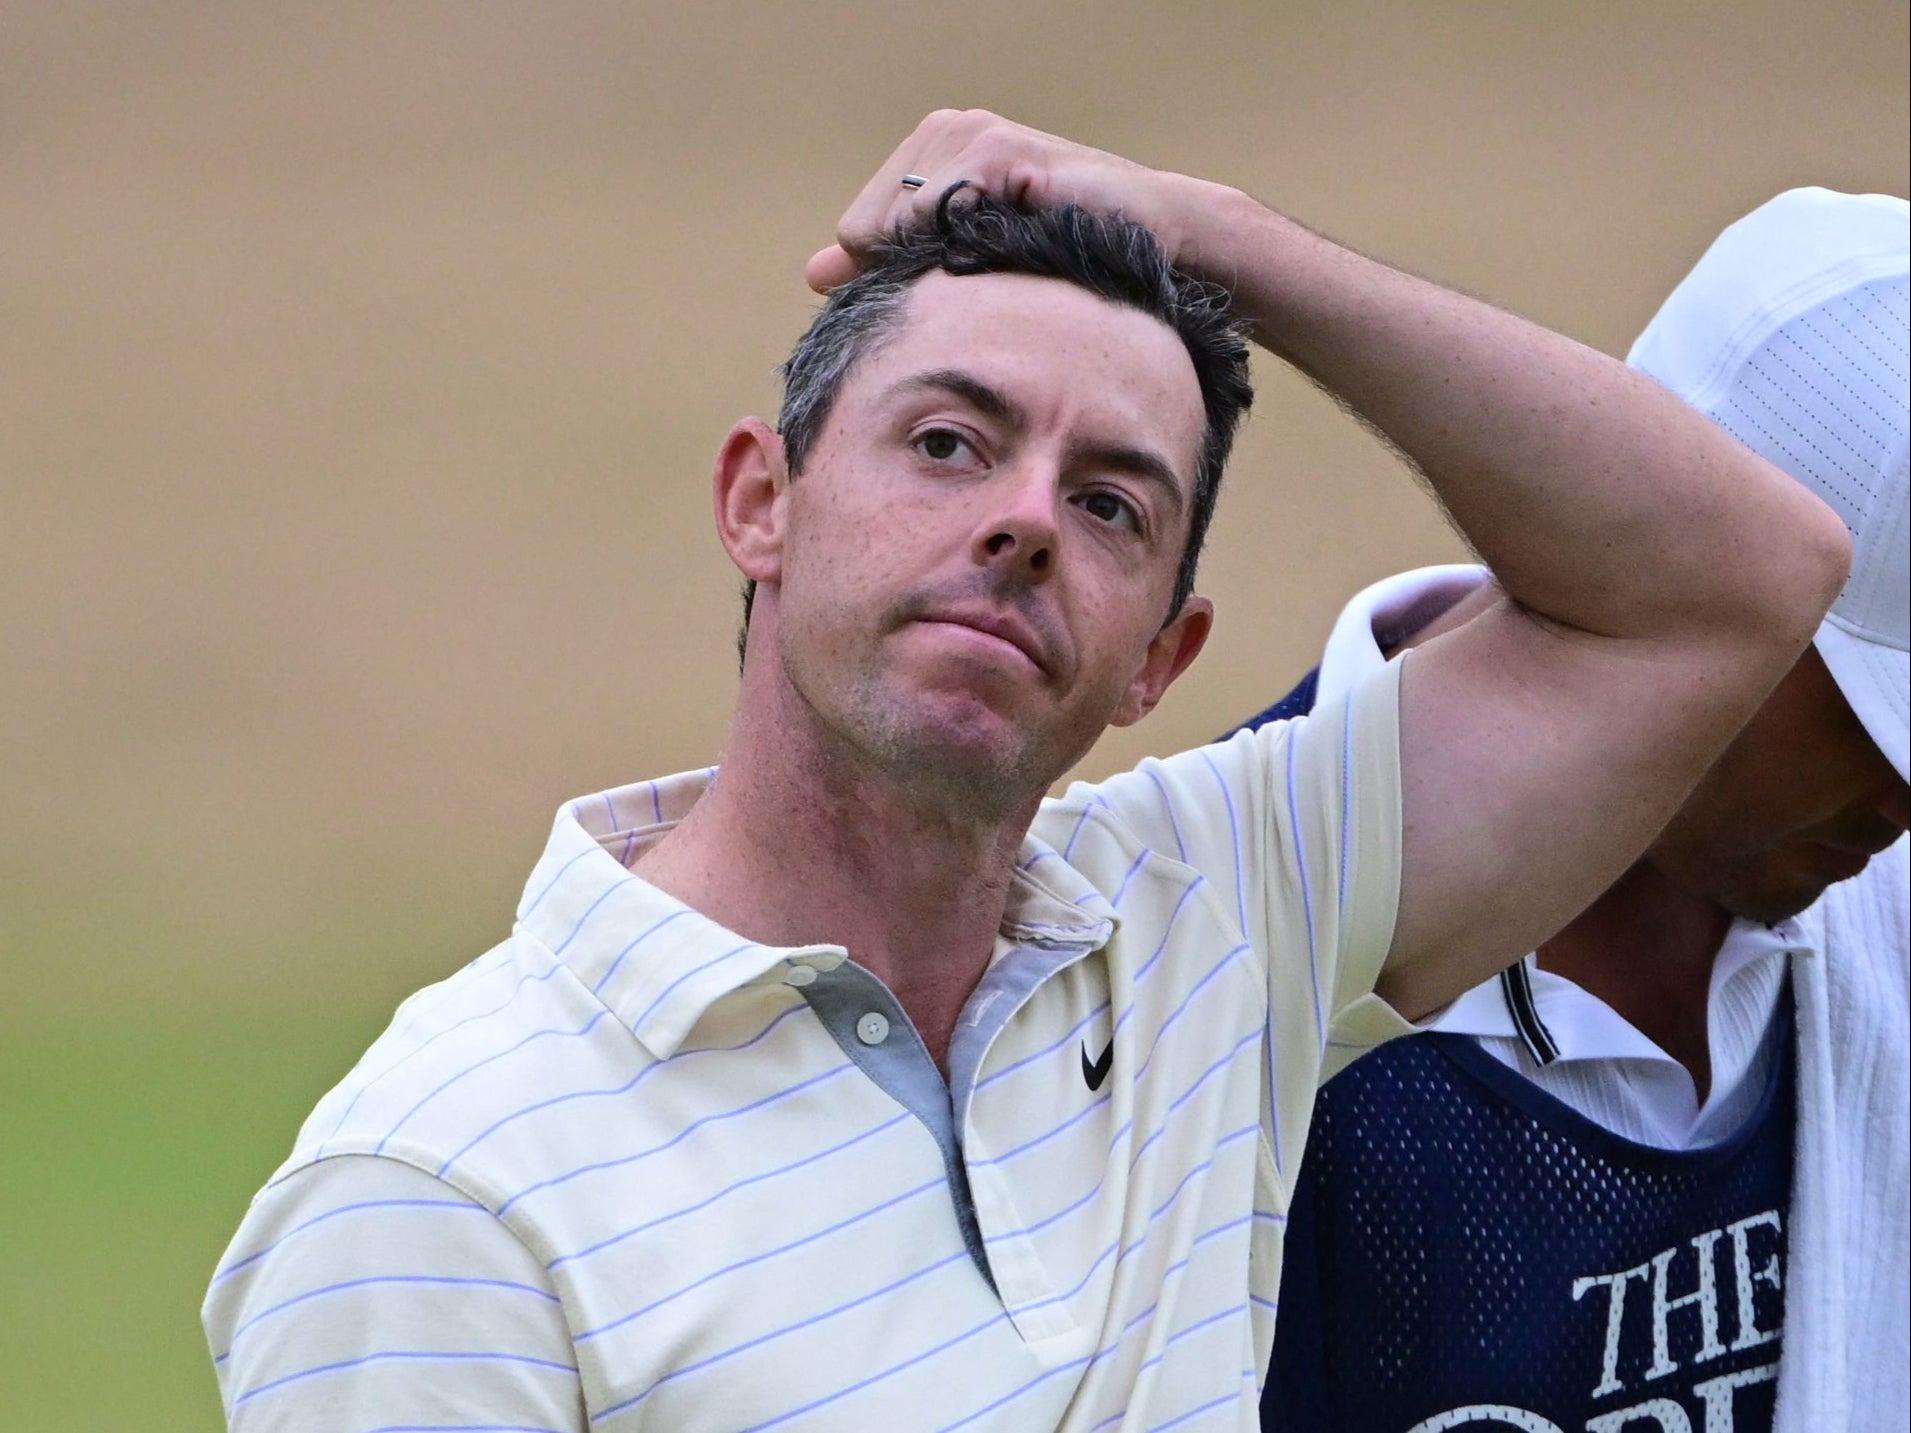 McIlroy again missed out on a major title as Cameron Smith won the Claret Jug at St Andrews